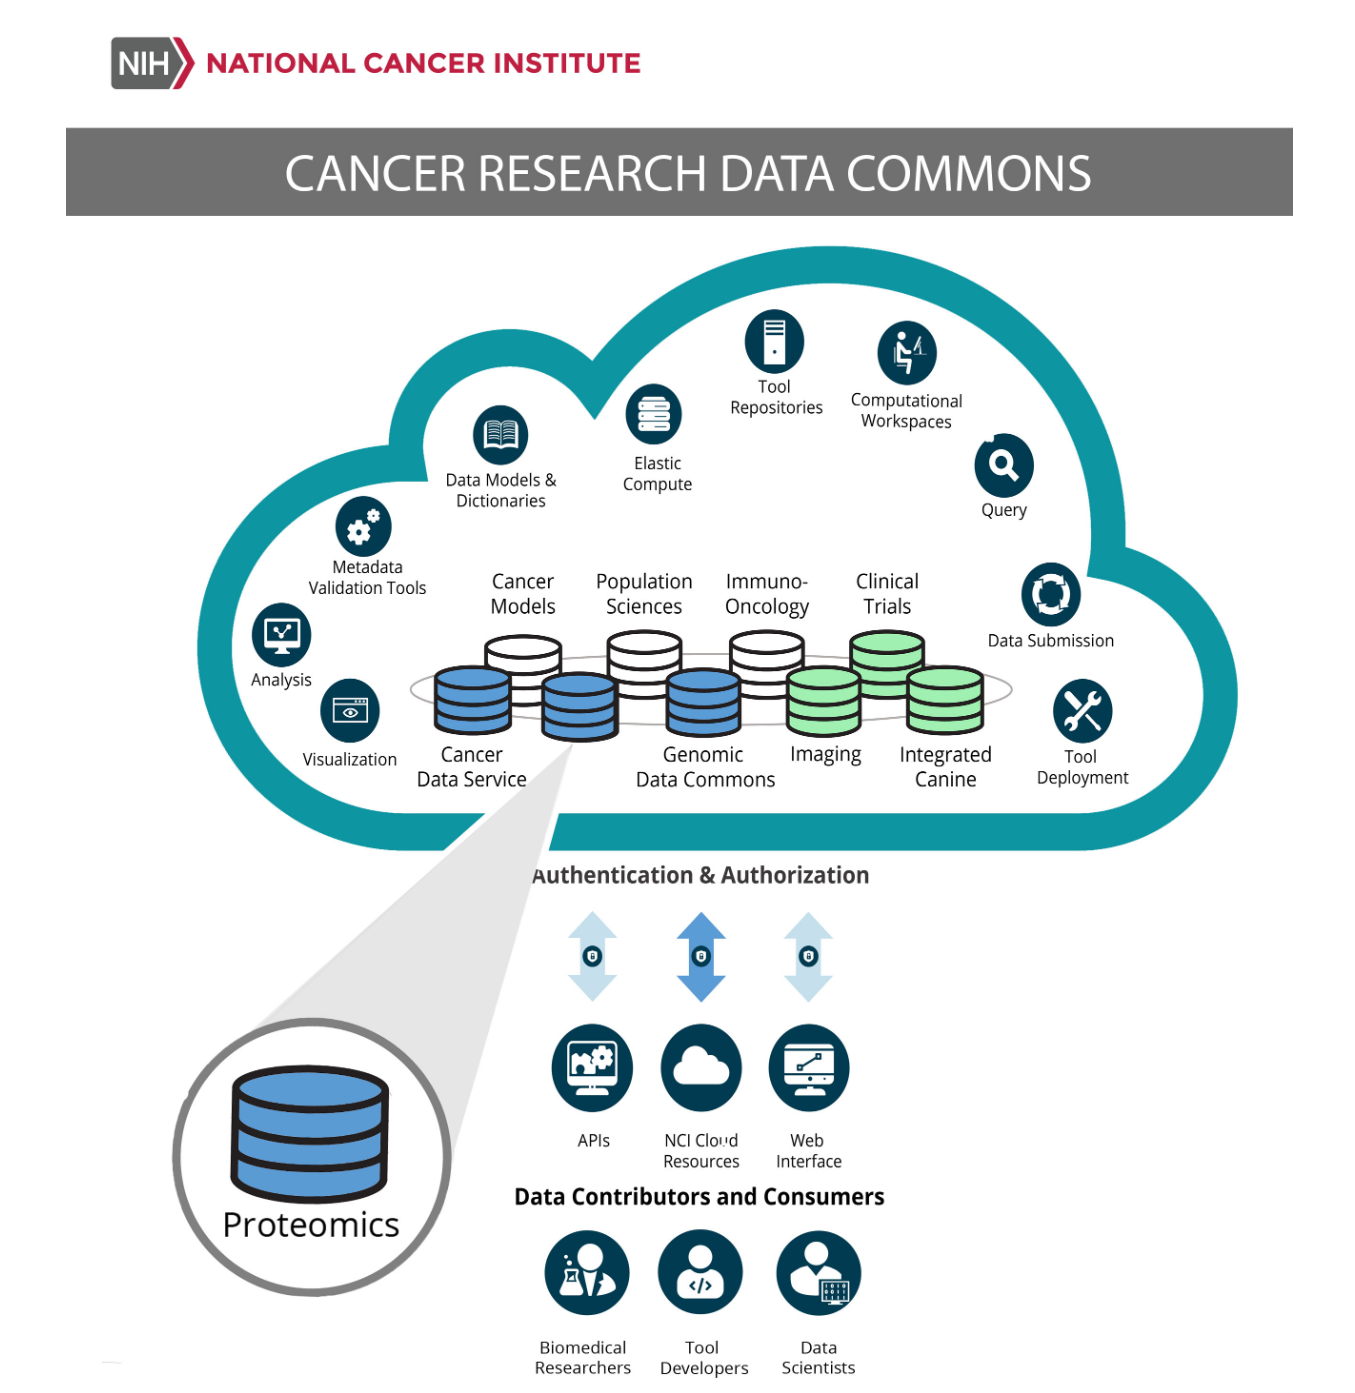 Multiple icons that represent working flow of NCI's Cancer Research Data Commons (CRDC). The CRDC provides biomedical researchers, tool developers, and data scientists with access to data from NCI programs through the Genomic Data Commons, NCI Cloud Resources, and Proteomics Data Commons. The CRDC allows users to analyze, share, and store results, and is growing to include a wider range of data, including proteomics, imaging, and canine.